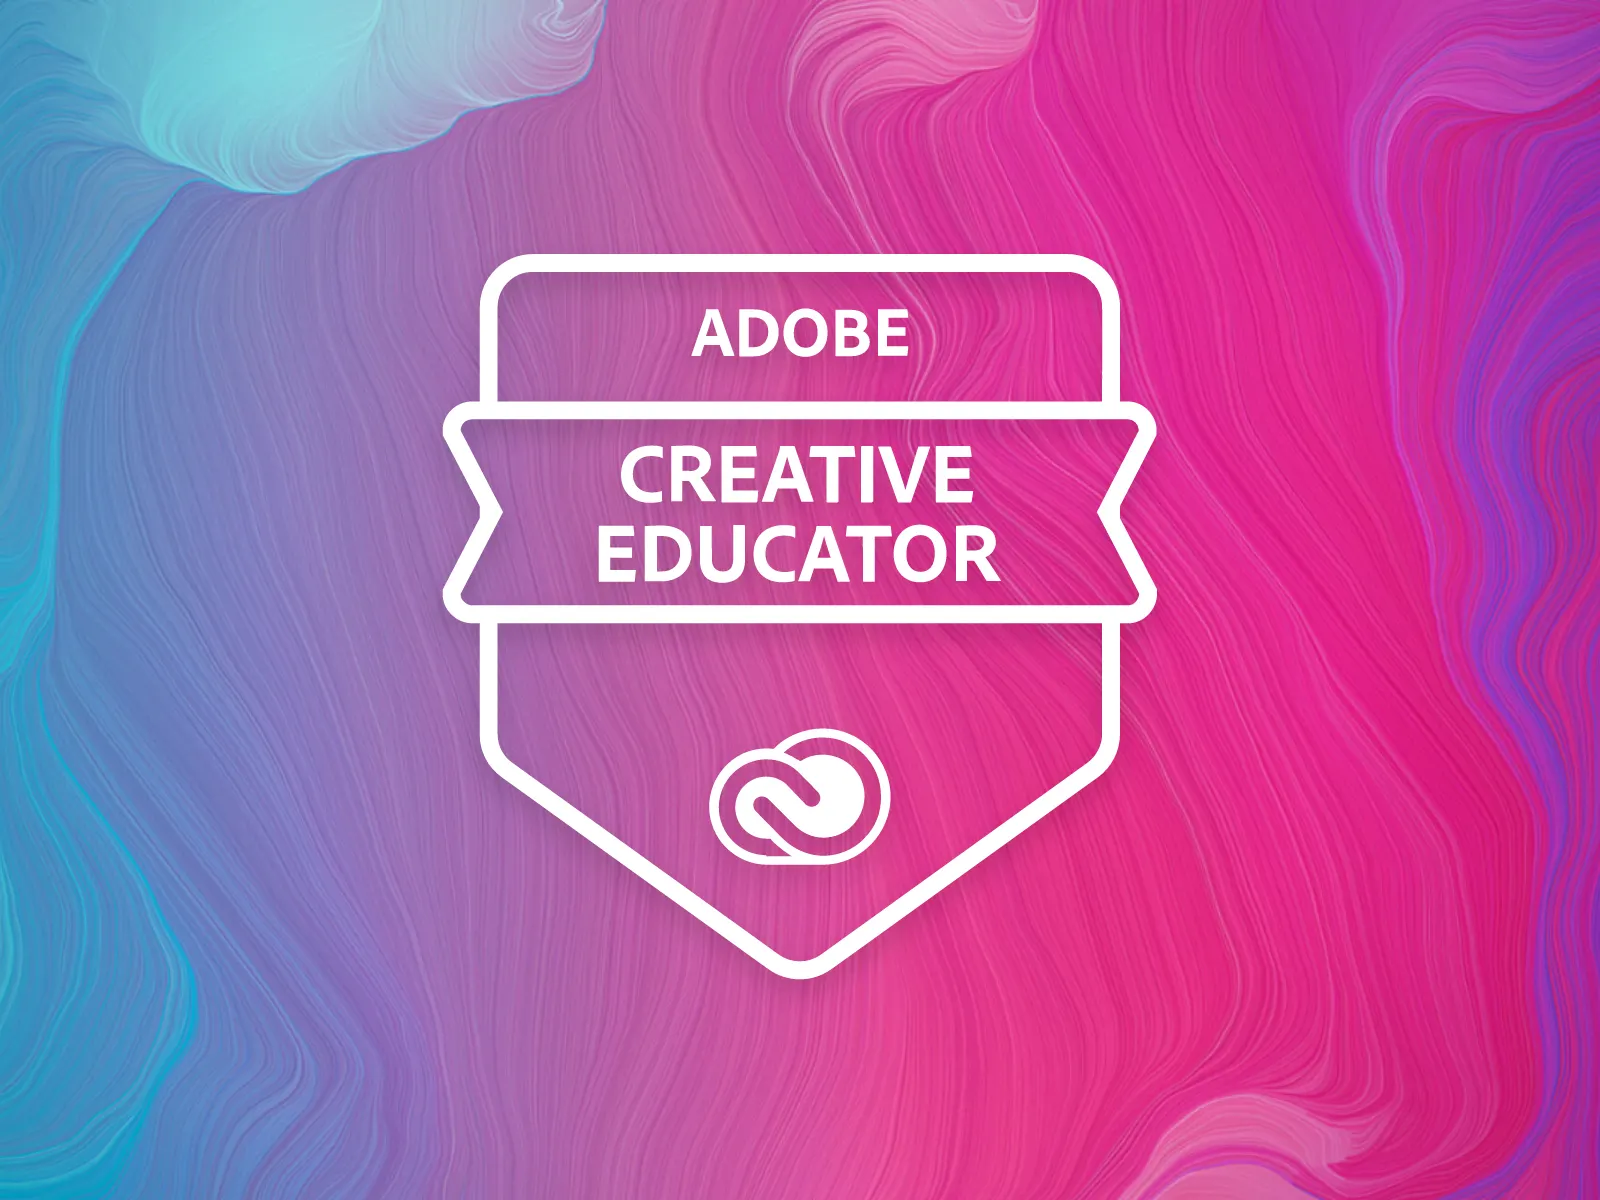 Want to share your Creative Cloud Express projects and ideas with others, and discover how to get the most from Adobe apps in your classroom? Join our Creative Educator community to earn badges and be part of the movement to bring creativity to every classroom